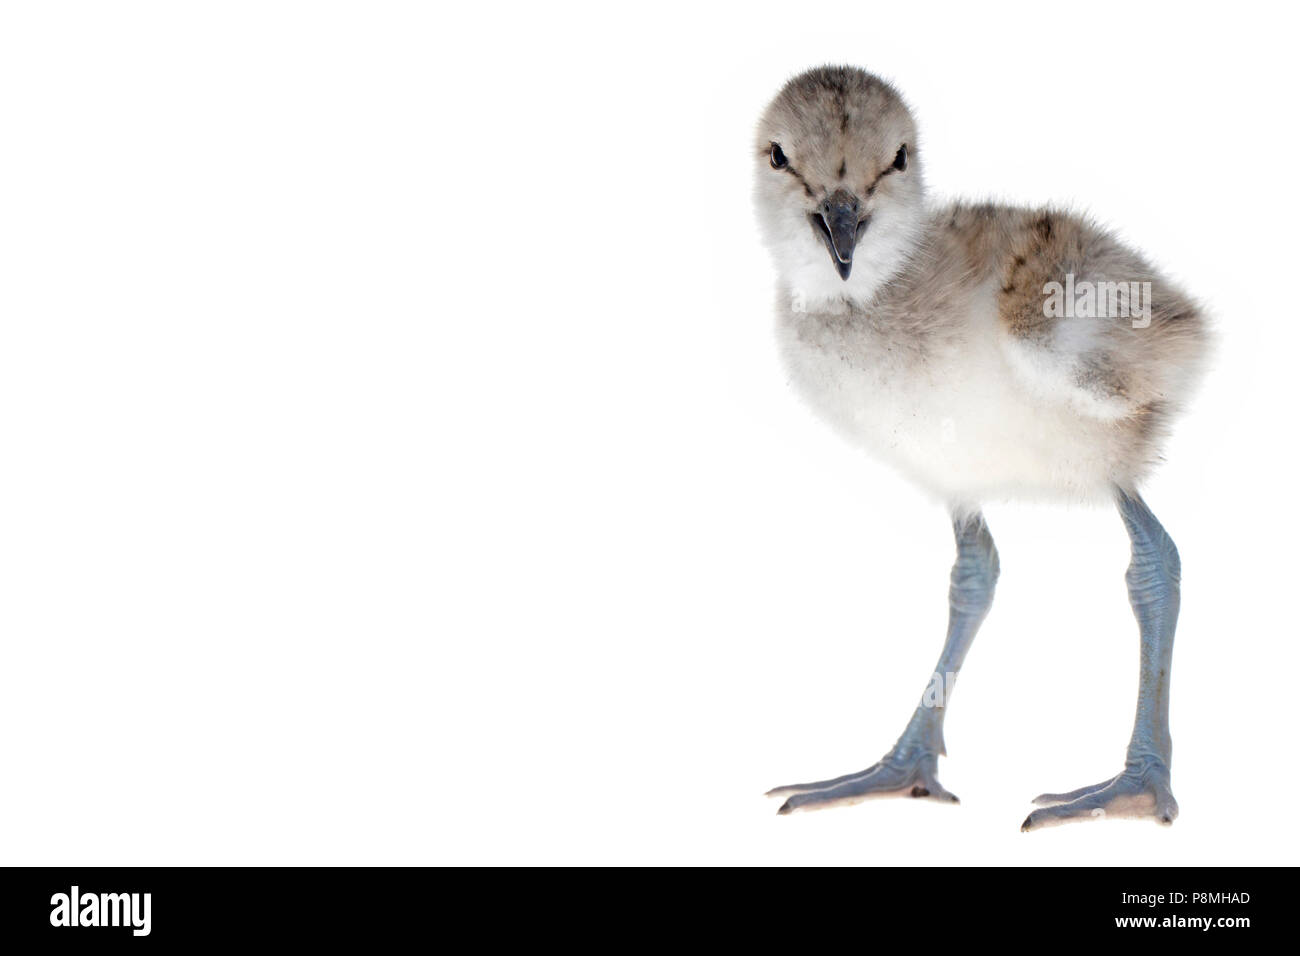 avocet chick isolated against a white background Stock Photo